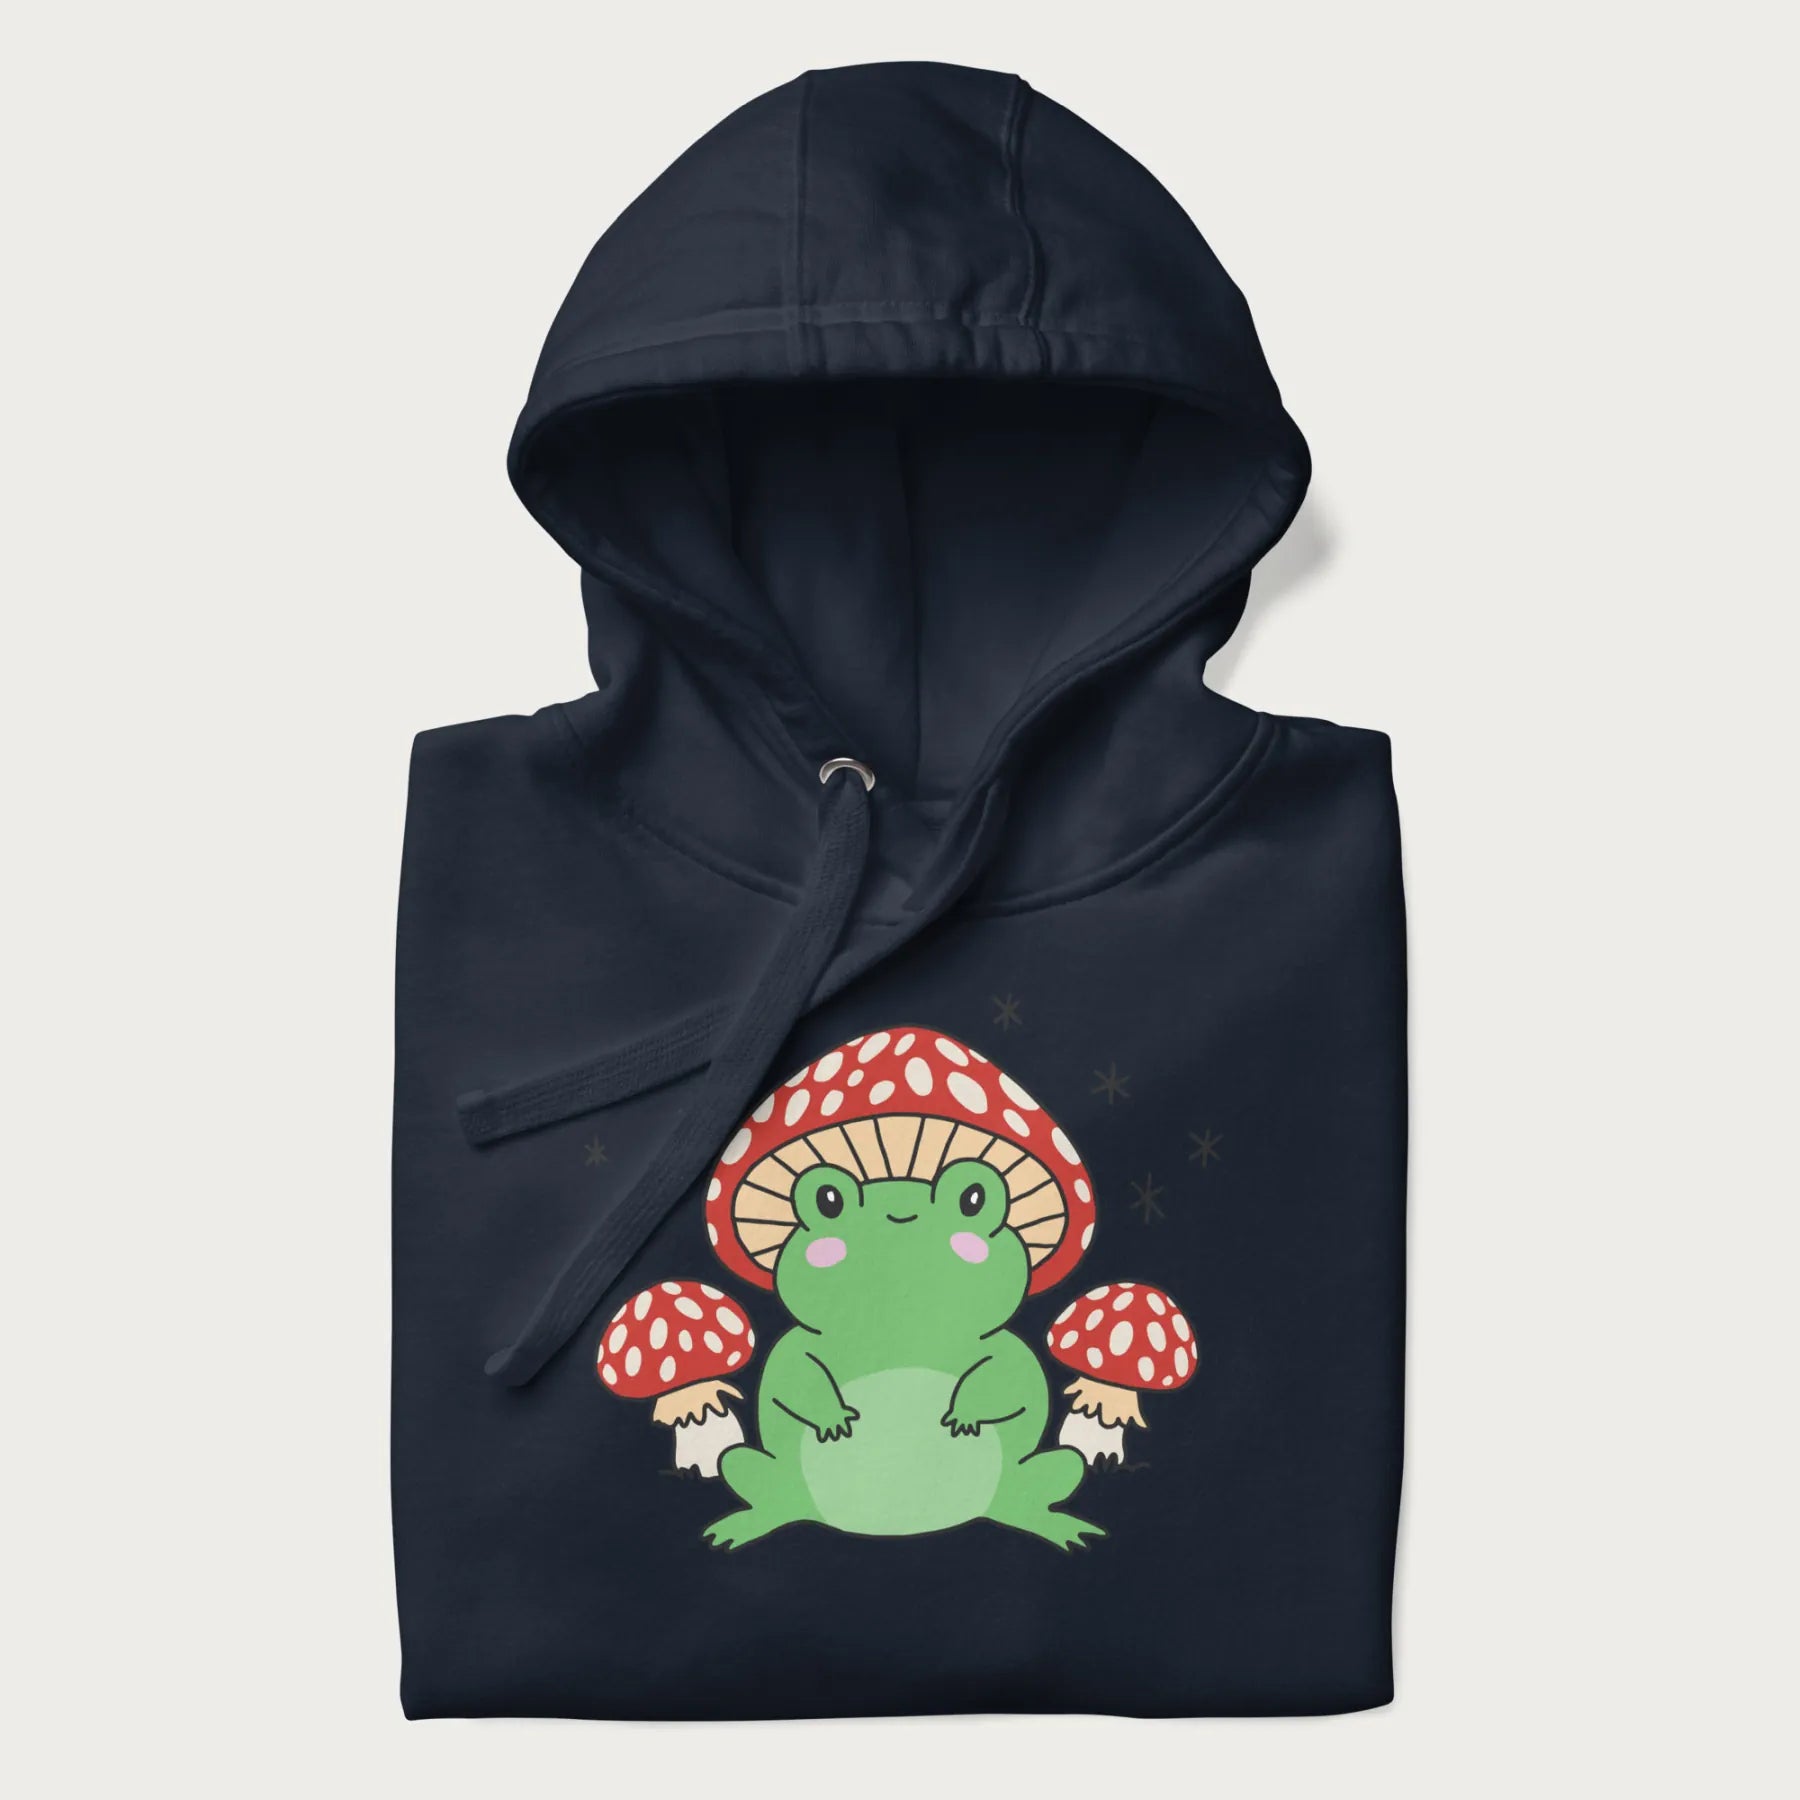 Folded navy blue hoodie will illustration of a cute green frog with red and white mushrooms.